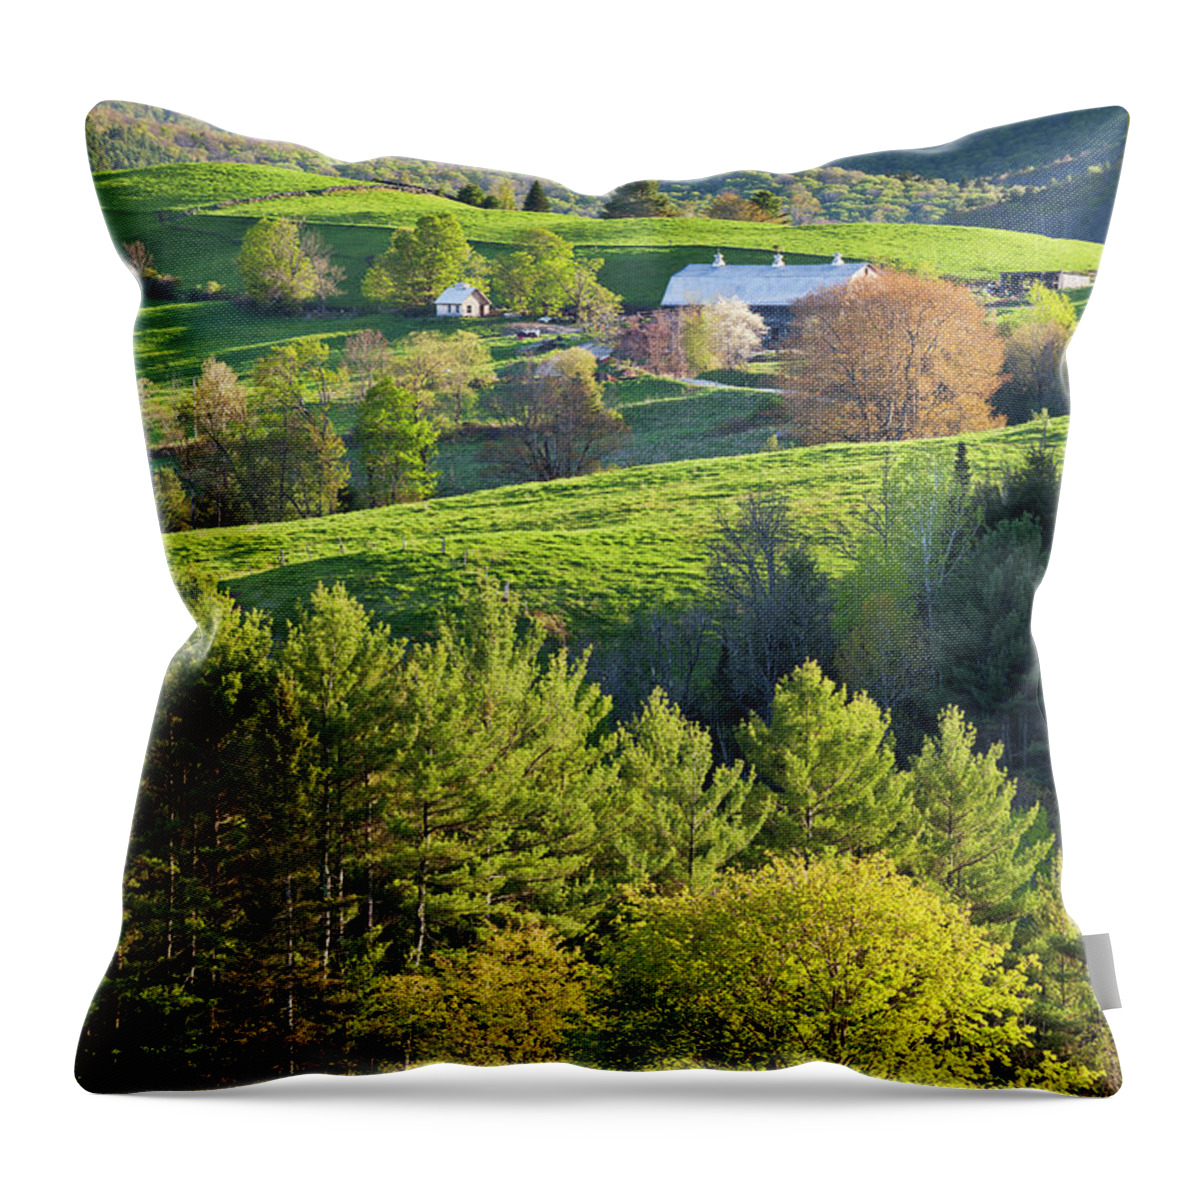 Spring Throw Pillow featuring the photograph Vibrant Spring by Alan L Graham